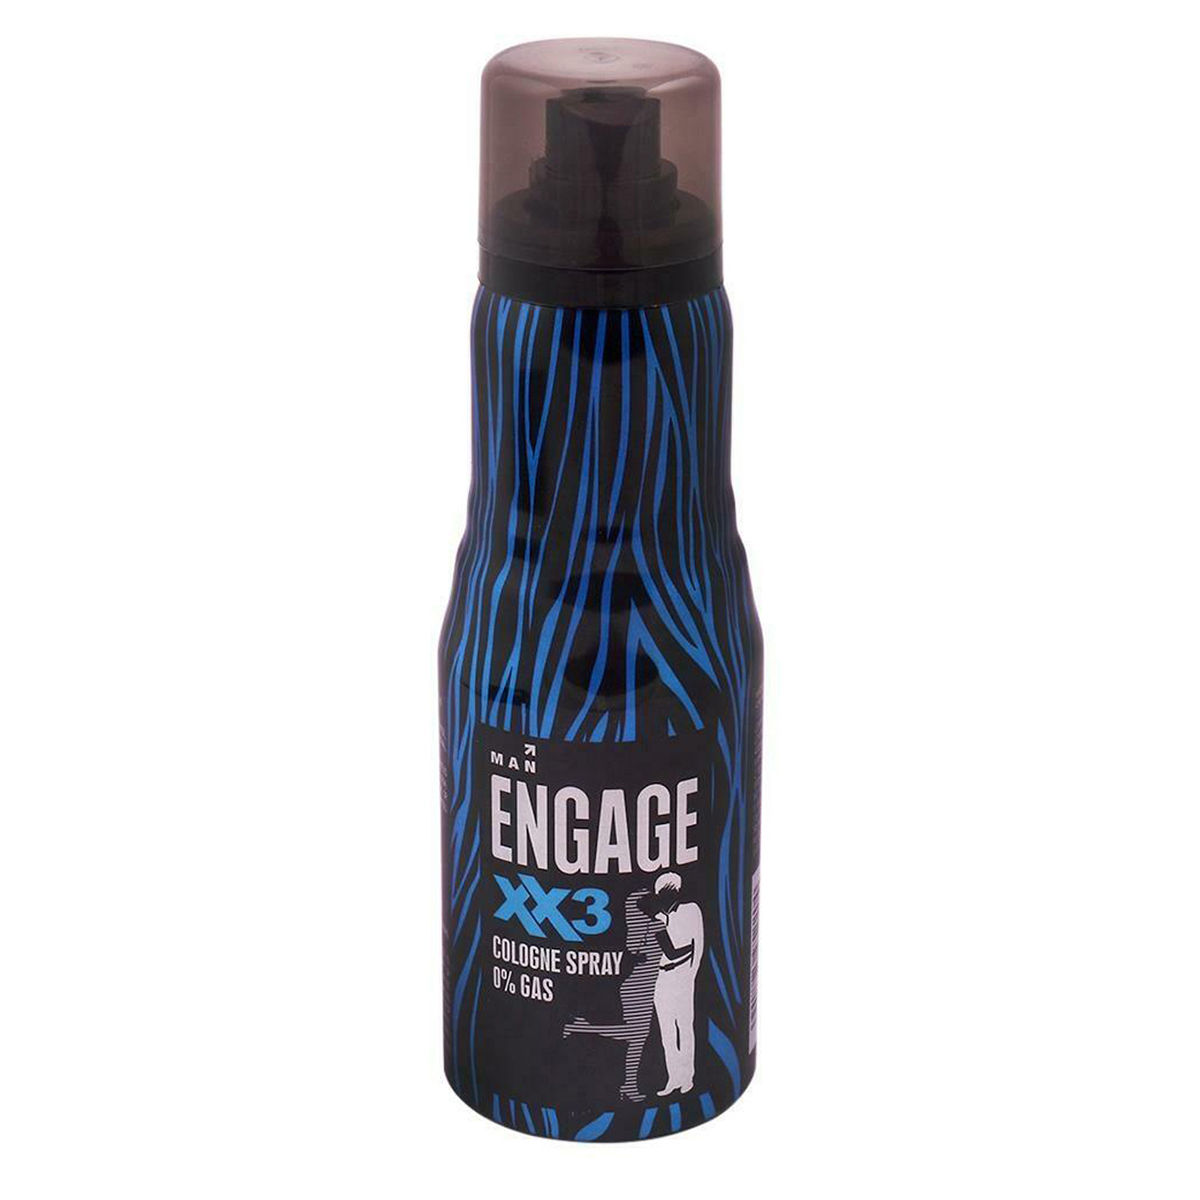 Buy Engage XX3 Cologne Spray, 165 ml Online